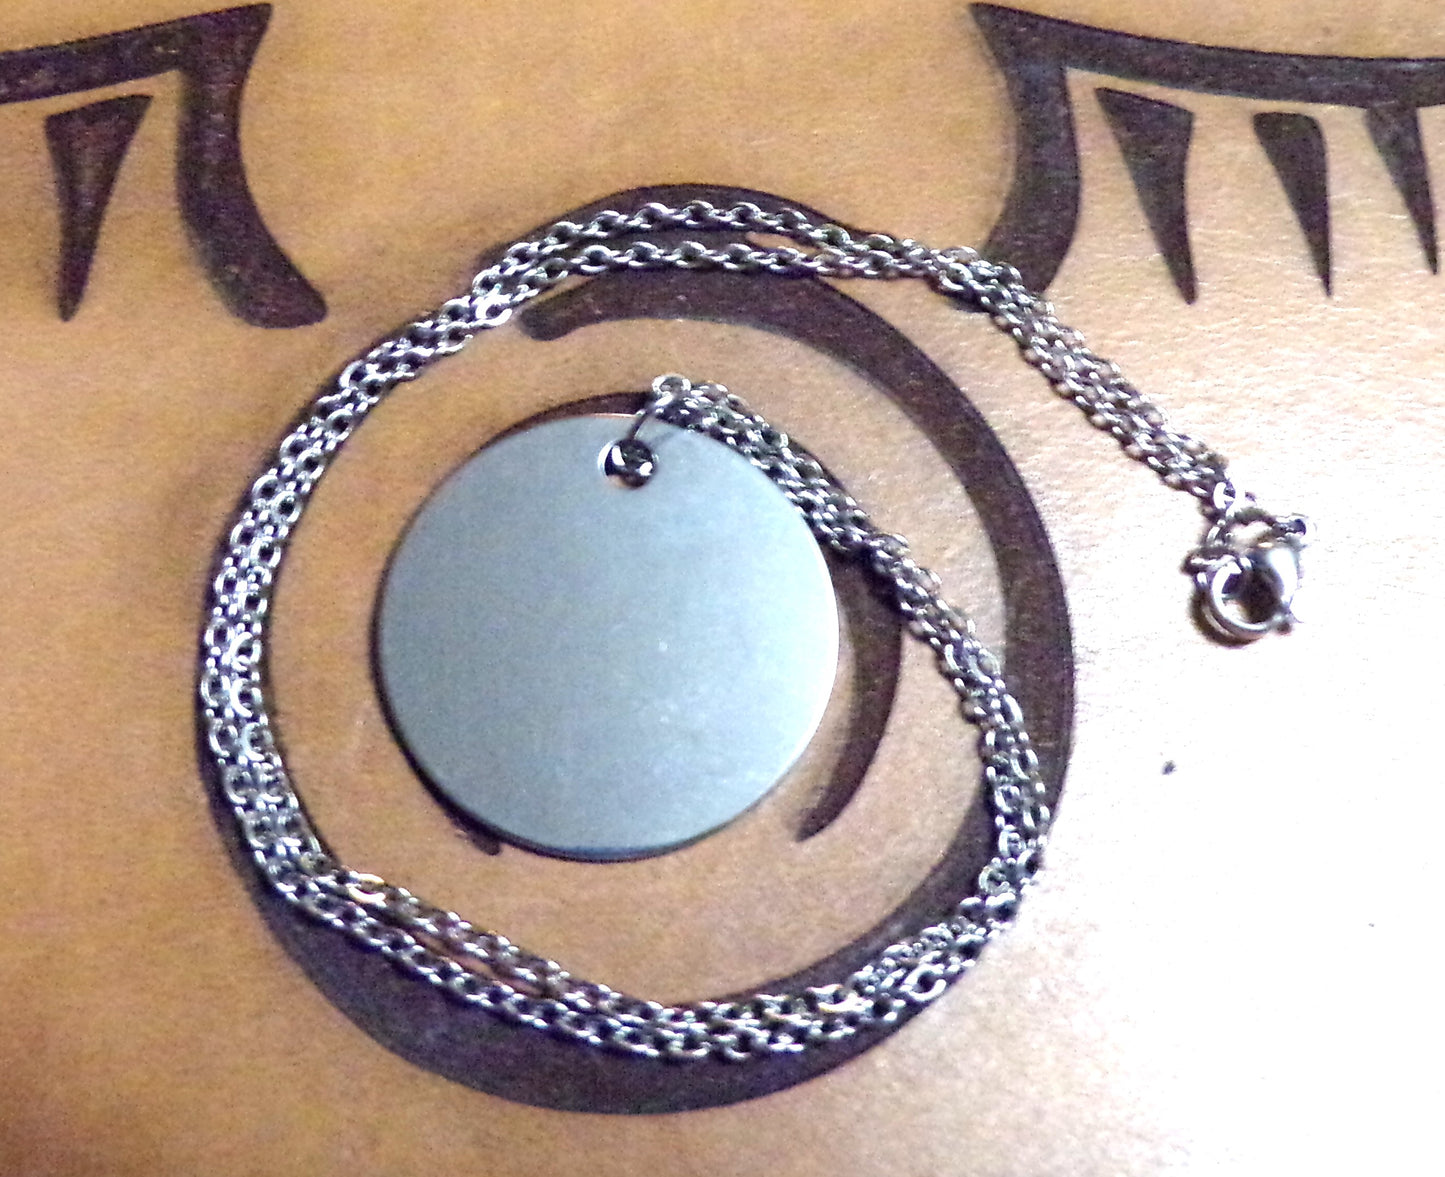 Styx Amulet Round Stainless steel with chain